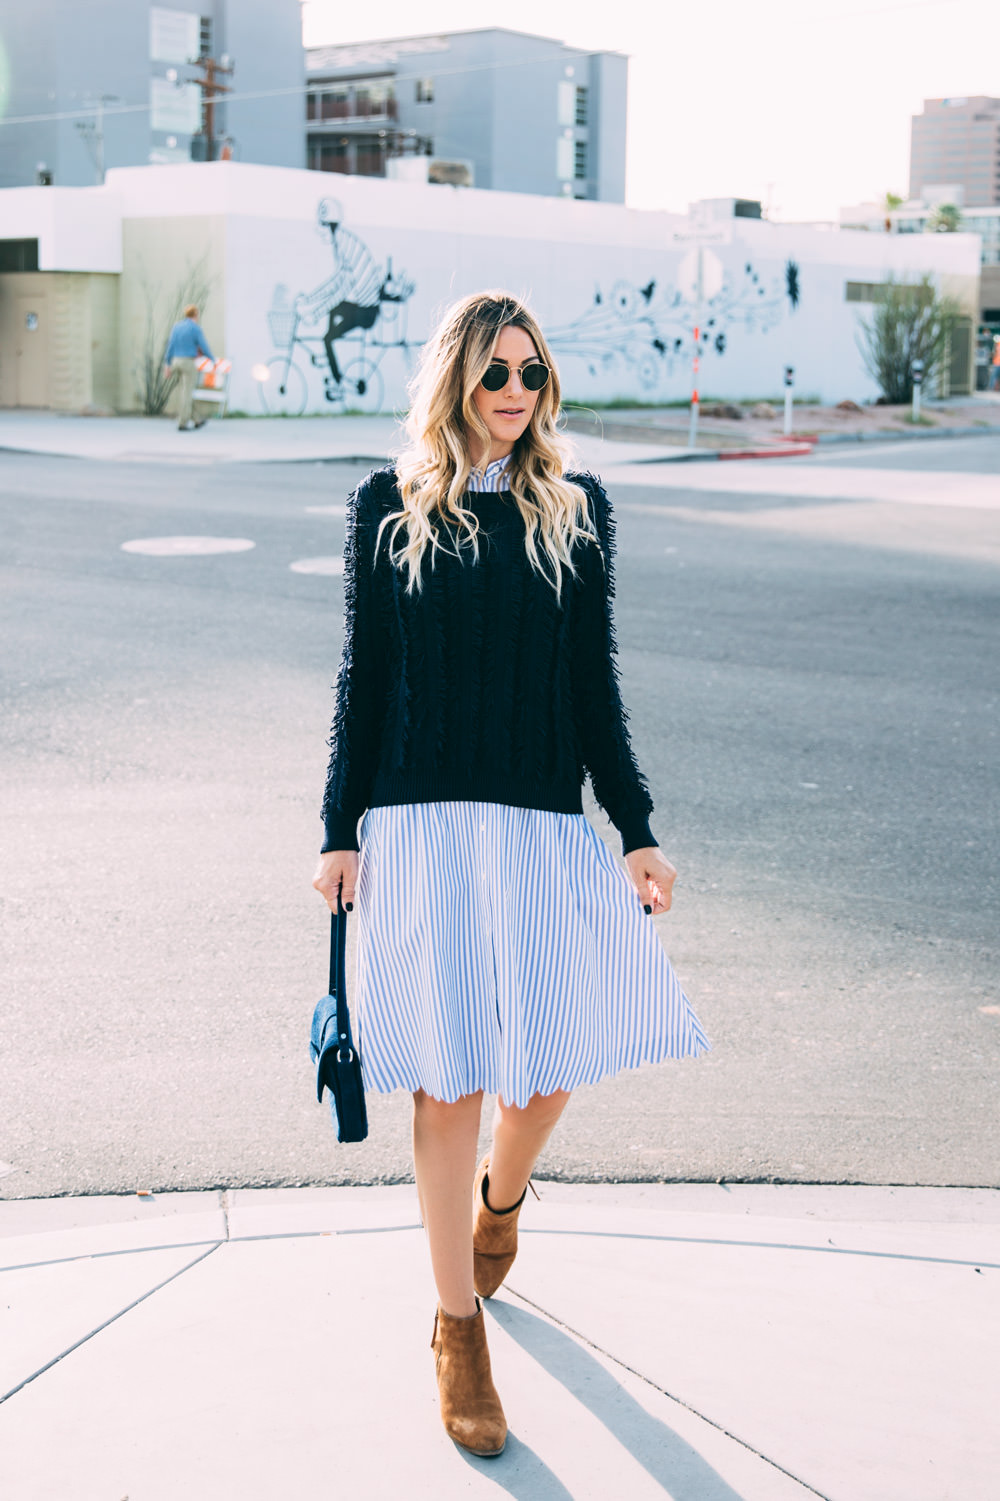 Caitlin Lindquist of Dash of Darling styles a Banana Republic stripe scalloped hem dress with suede boots and a fringe sweater for a fall transition outfit